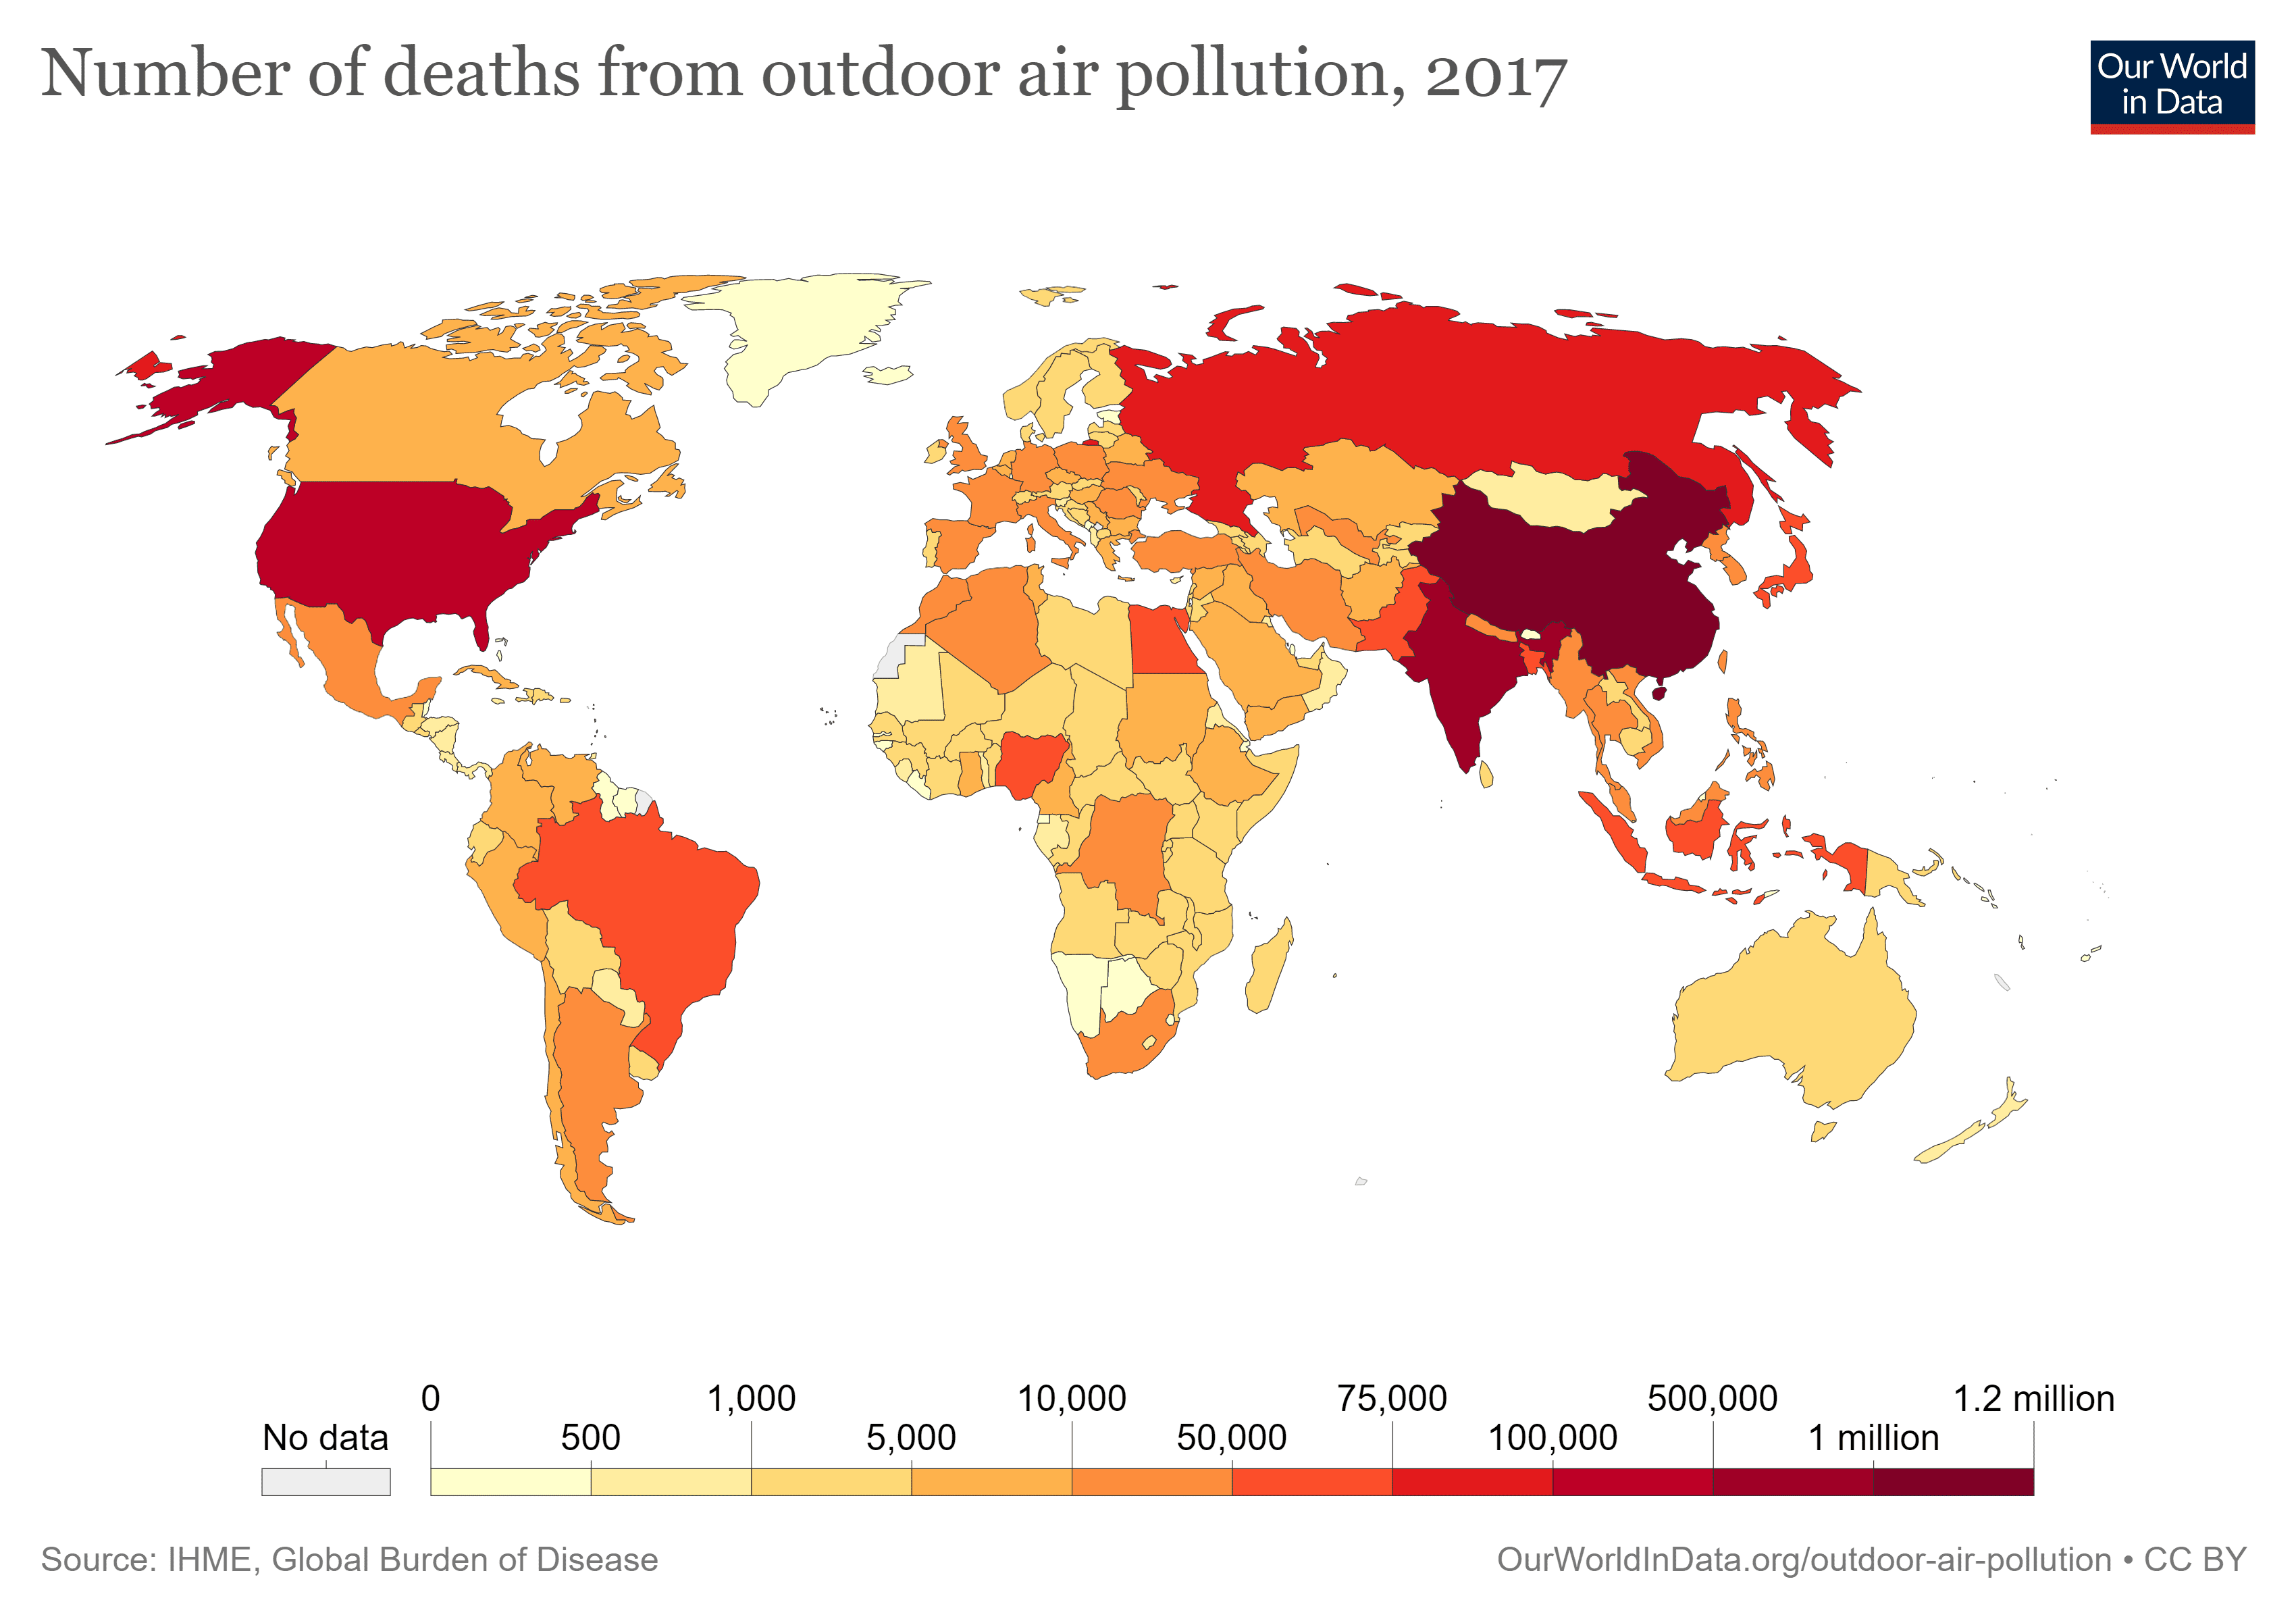 A global choropleth map shows number of deaths from outdoor air pollution in 2017. Countries like China, India, the United States and Russia are in the darker shades of red, indicating higher numbers of deaths.